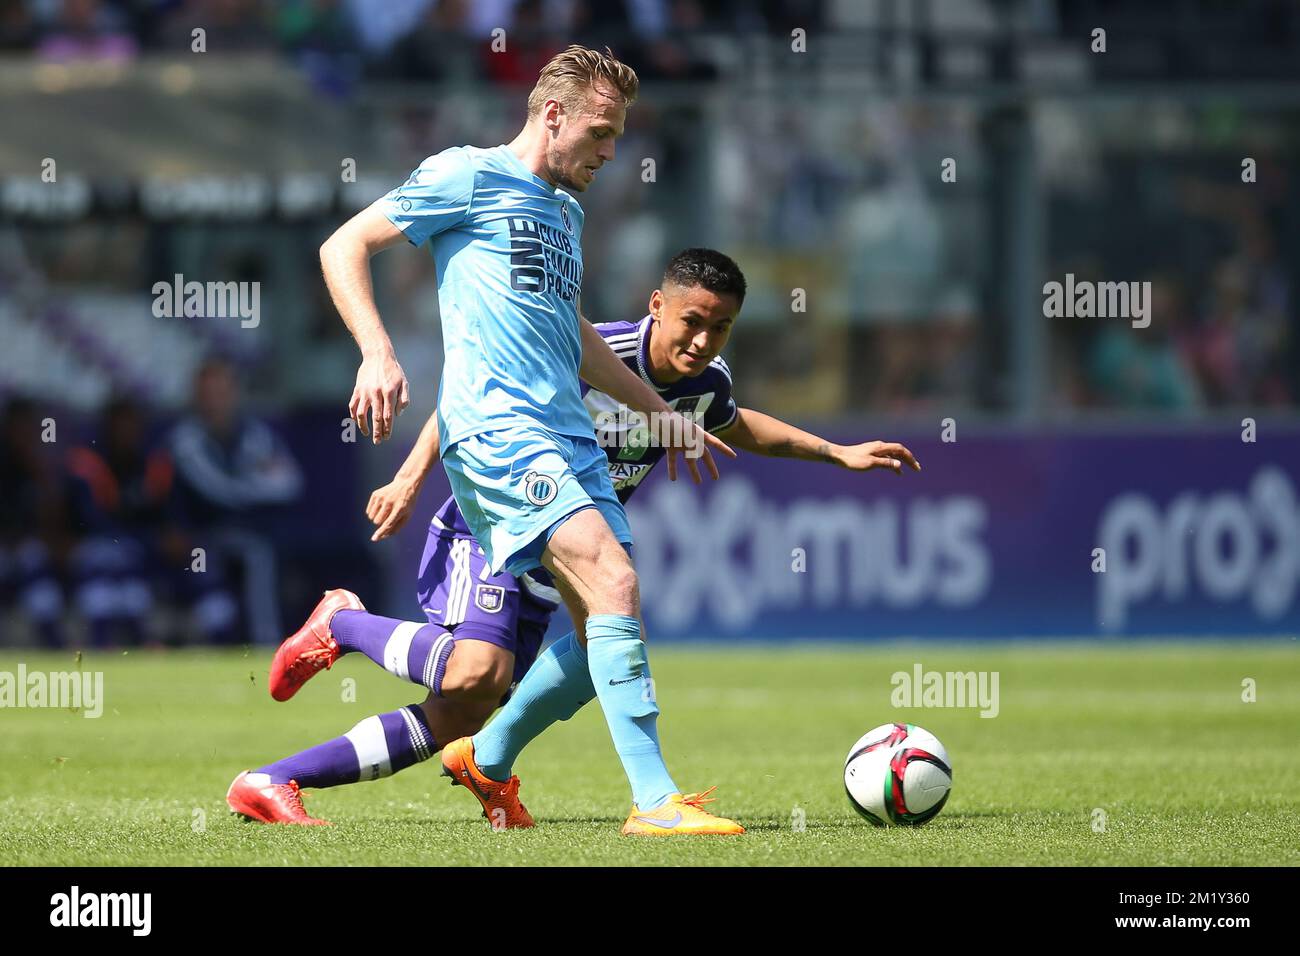 20150510 - BRUSSELS, BELGIUM: Club's Laurens De Bock and Anderlecht's Andy Najar fight for the ball during the Jupiler Pro League match between RSC Anderlecht and Club Brugge, Sunday 10 May 2015 in Brussels, on the seventh day of the Play-off 1. BELGA PHOTO BRUNO FAHY Stock Photo